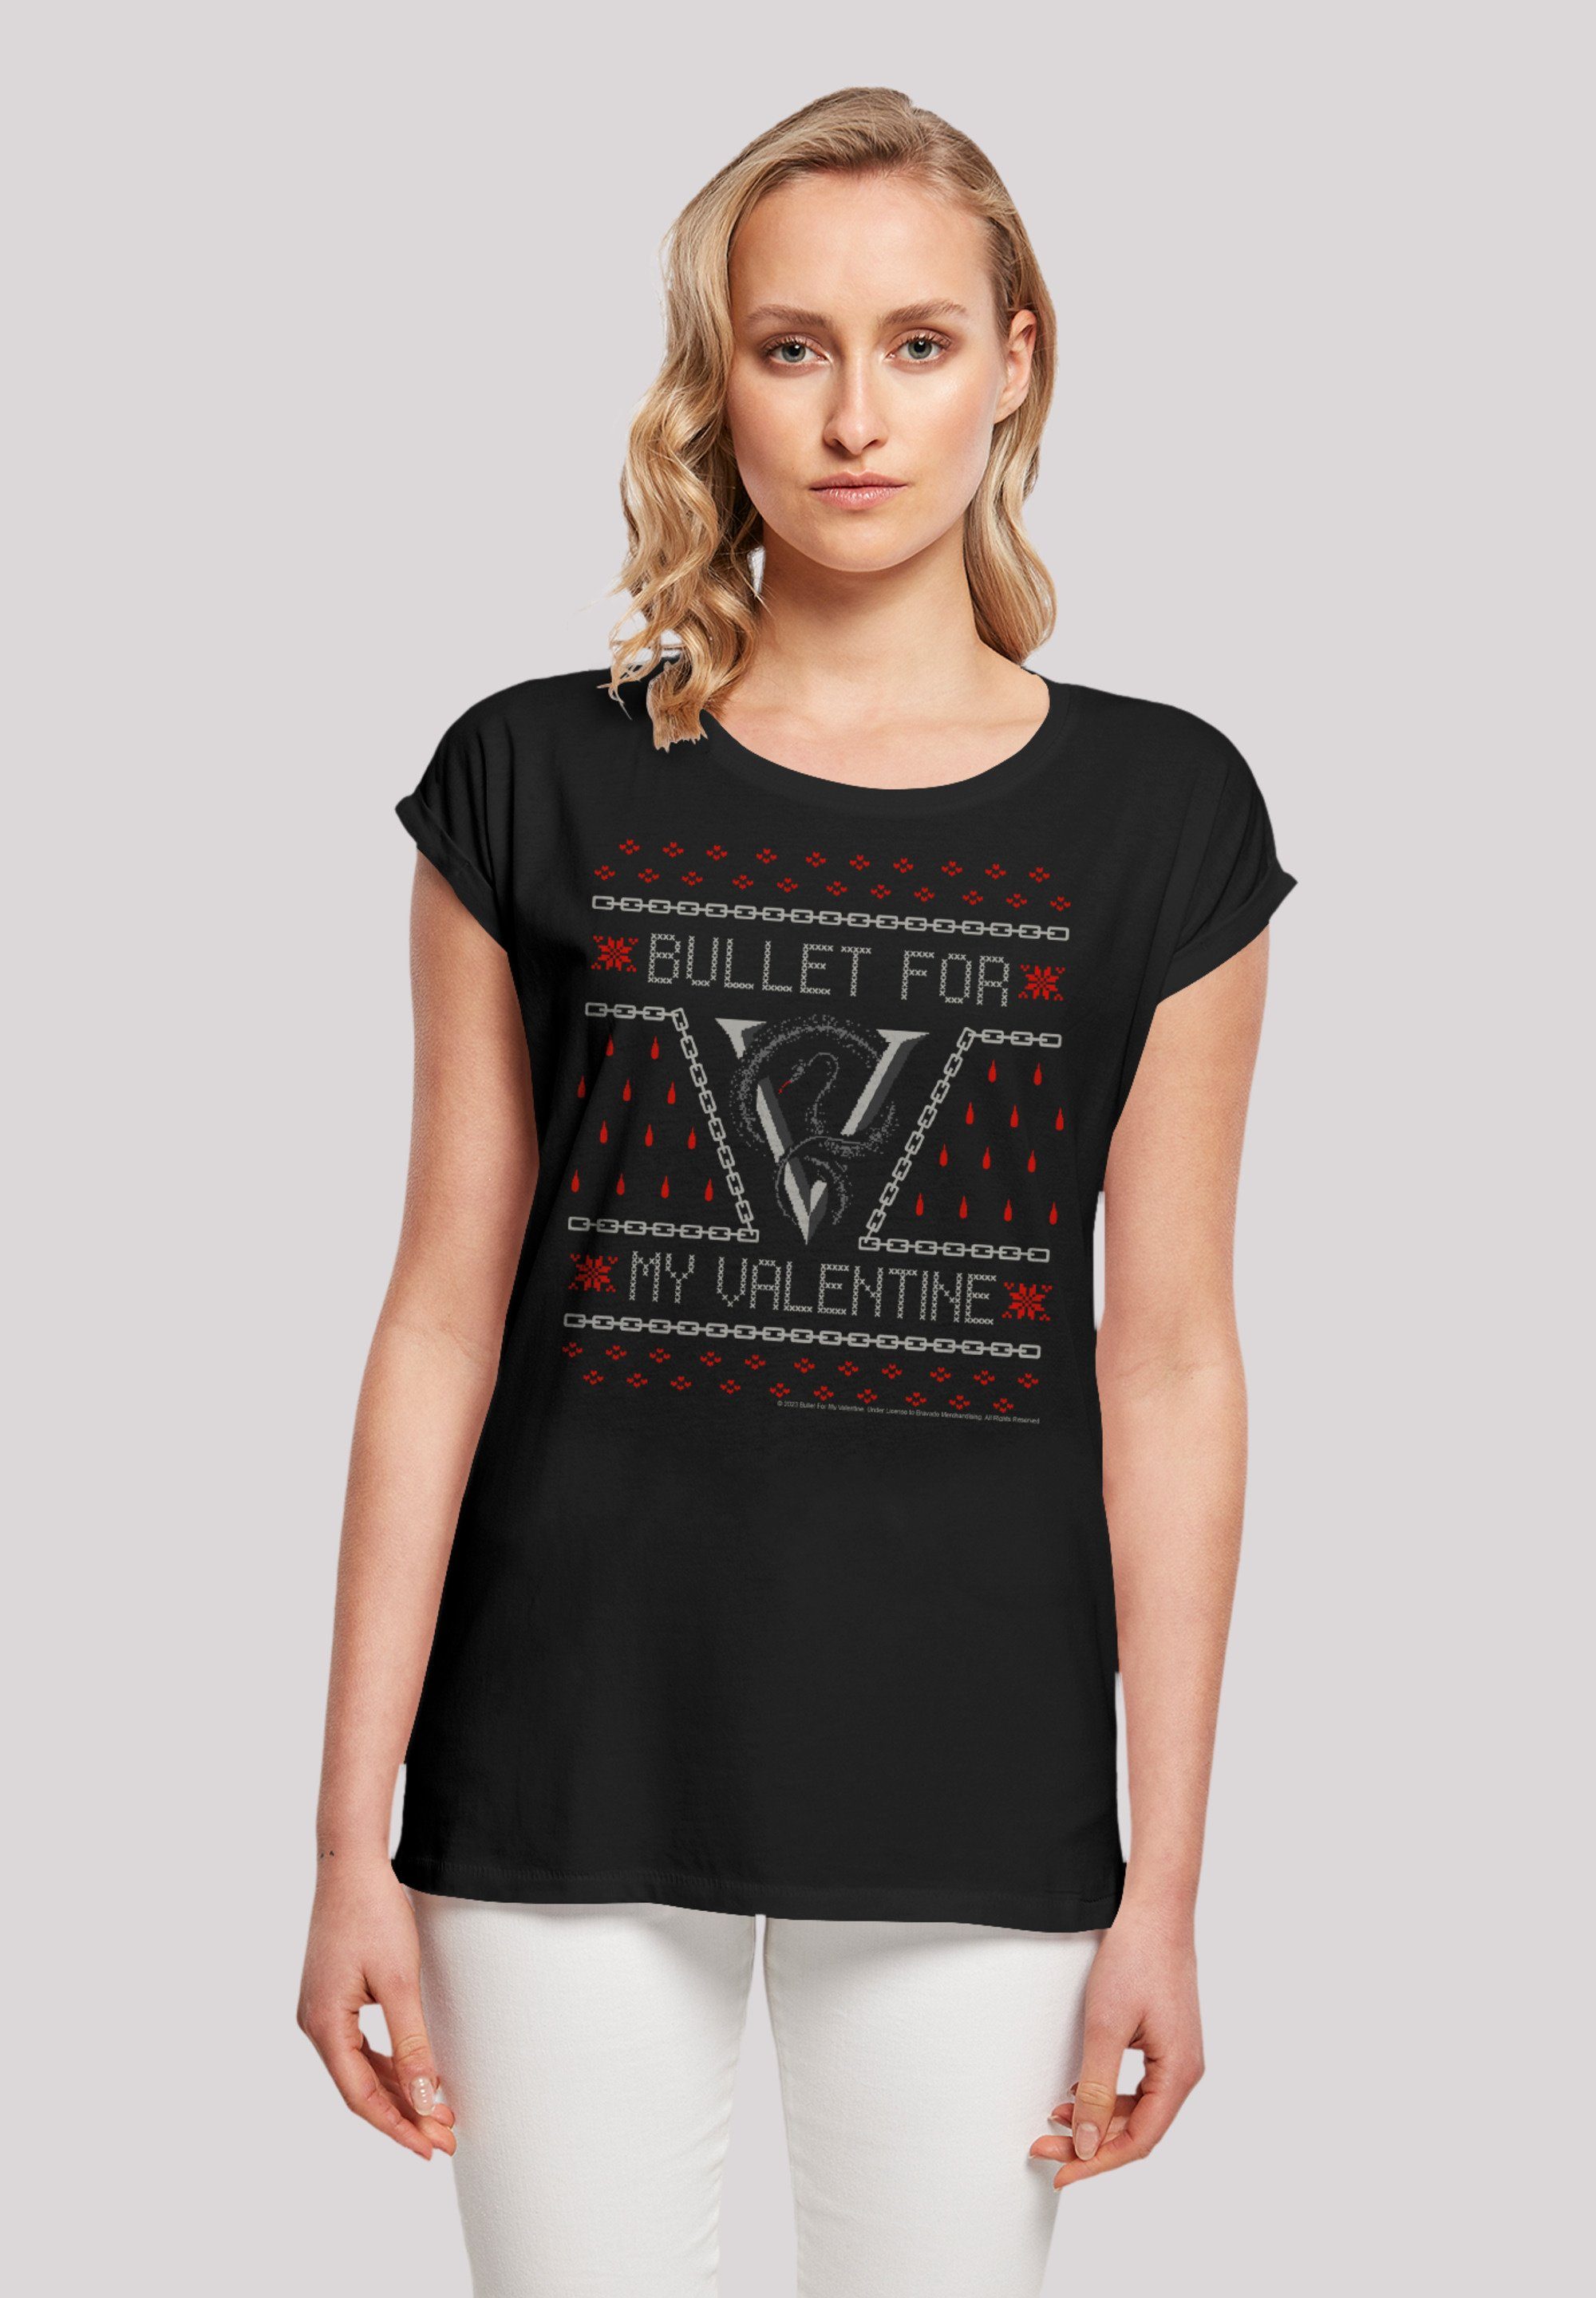 F4NT4STIC T-Shirt Bullet for my Valentine Metal Band Christmas Premium Qualität, Rock-Musik, Band